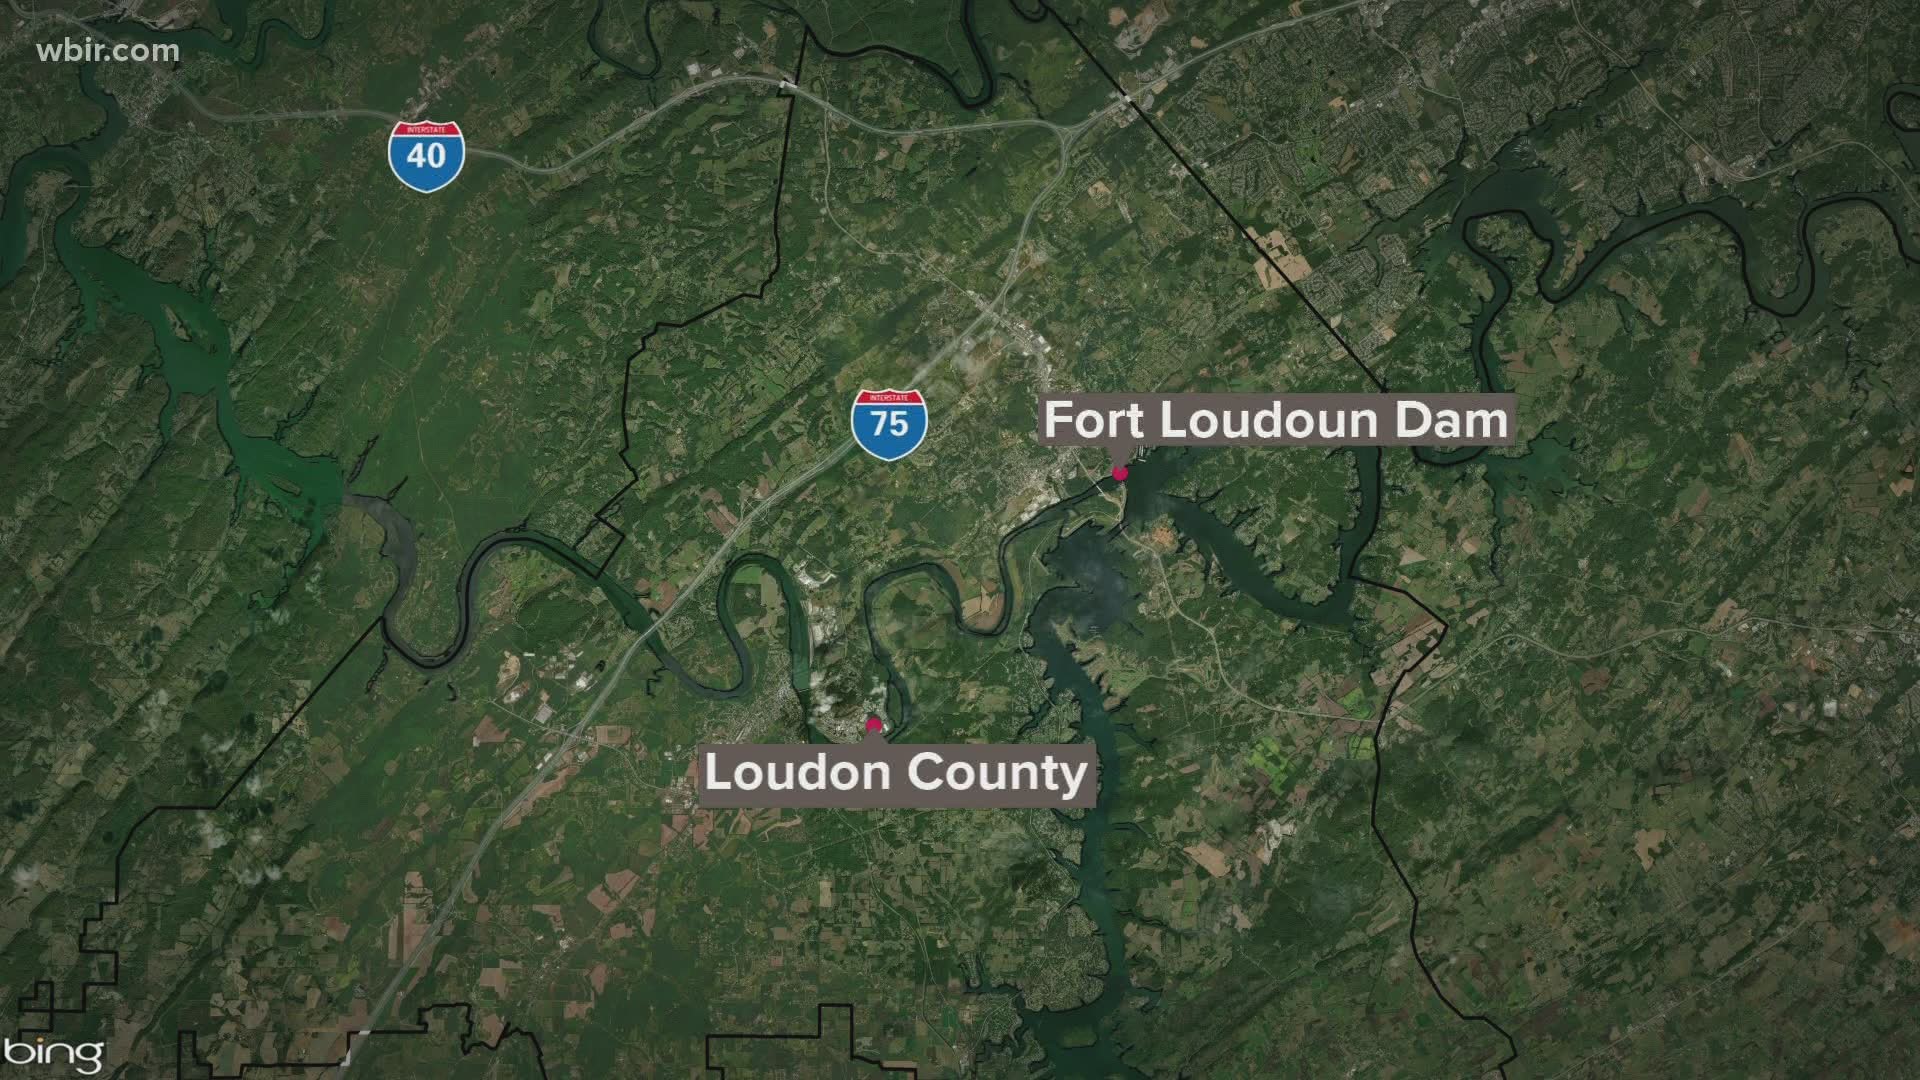 Crews will continue to look for a missing fisherman at Fort Loudoun Dam on Monday.